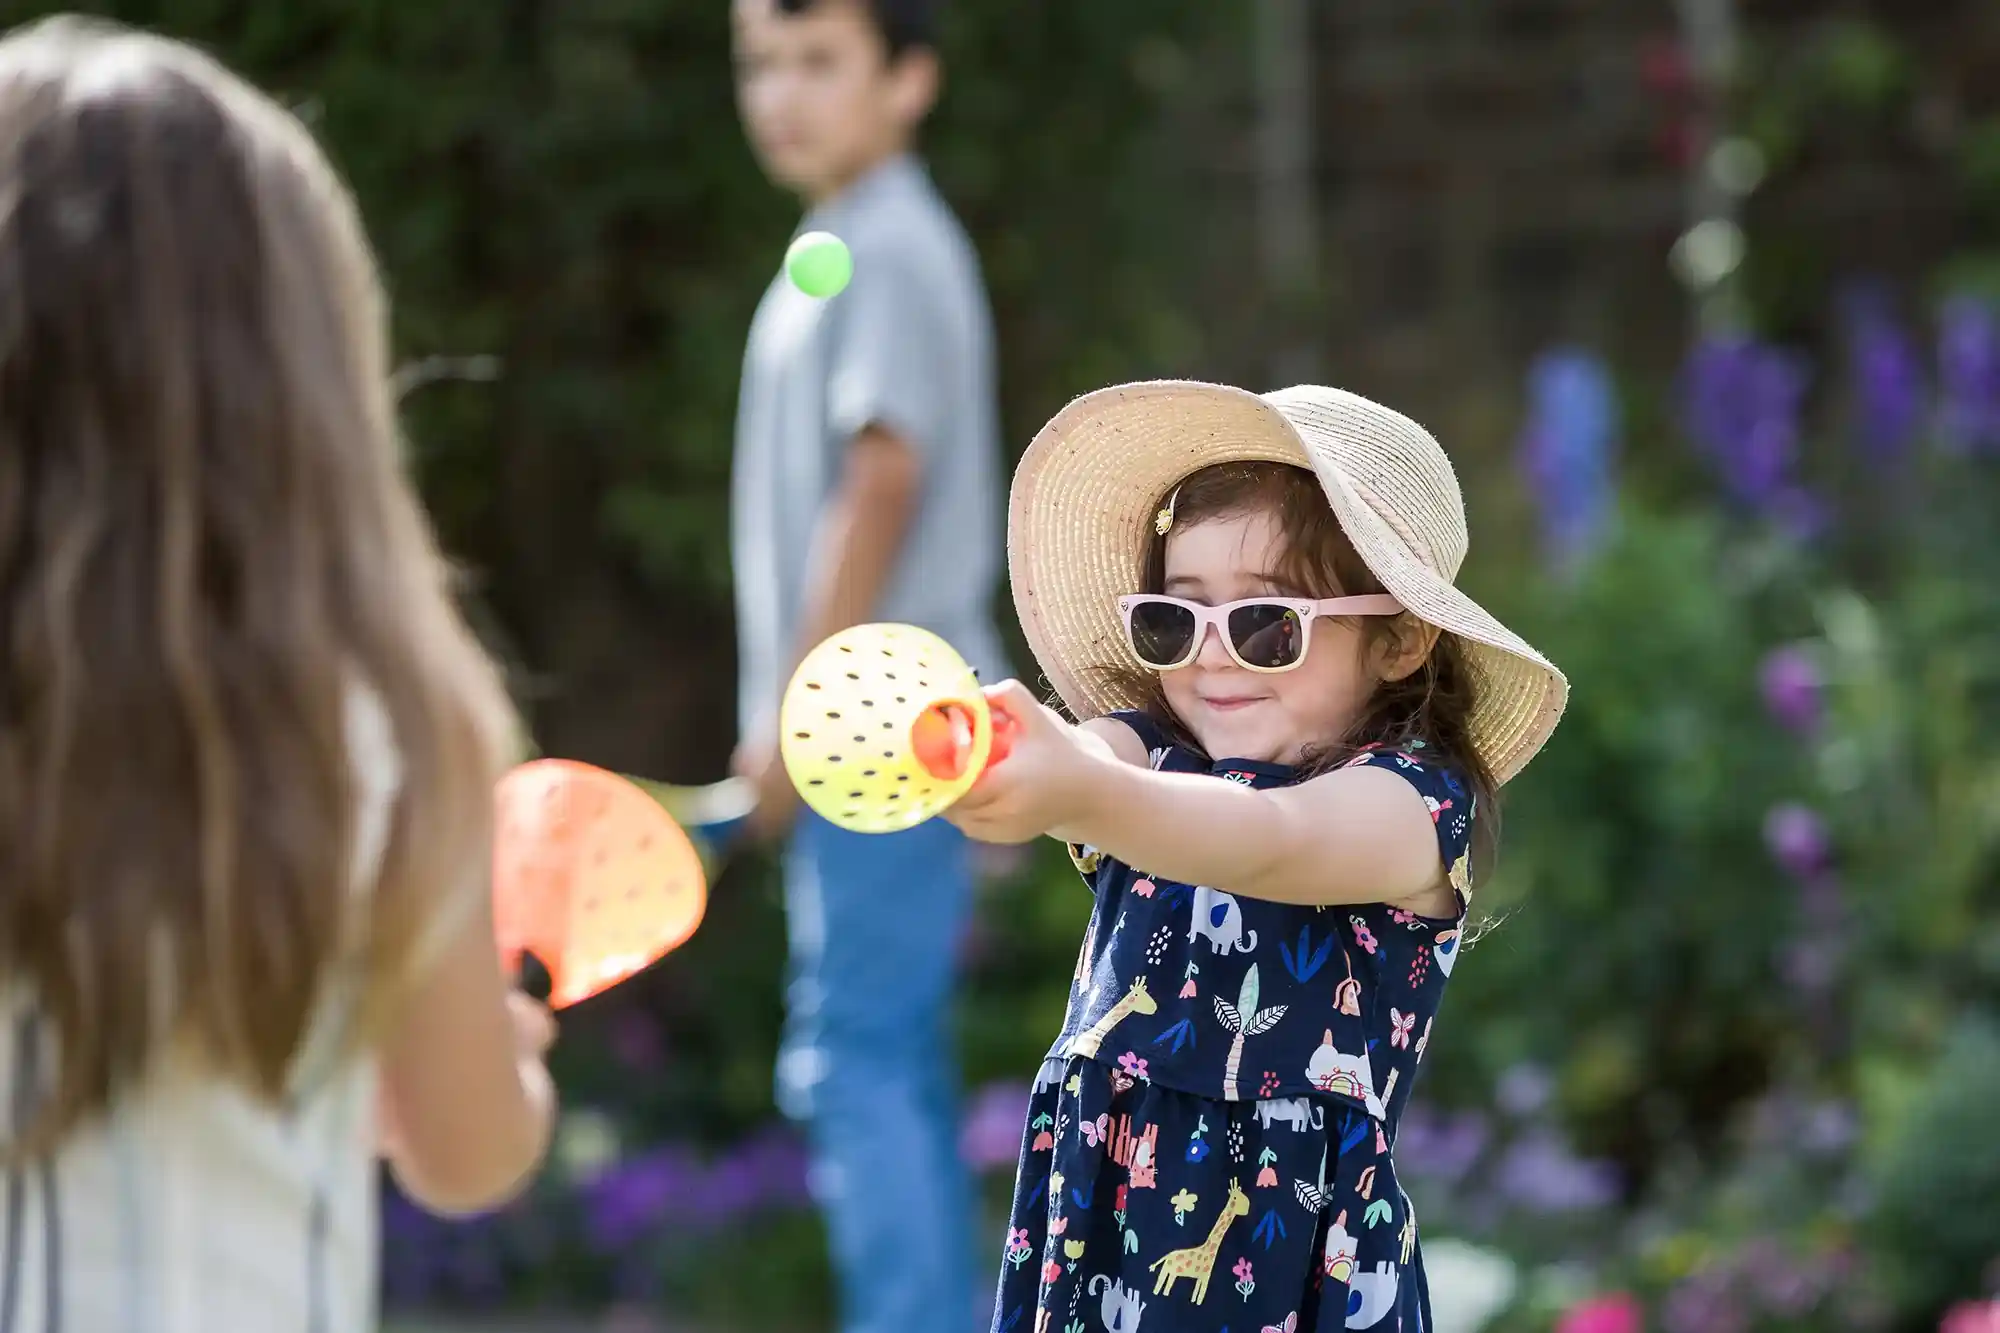 Two children playing in a garden. One child in a hat and sunglasses is holding a toy racket, while the other faces away. A third child stands in the background. Flowers and greenery are visible.